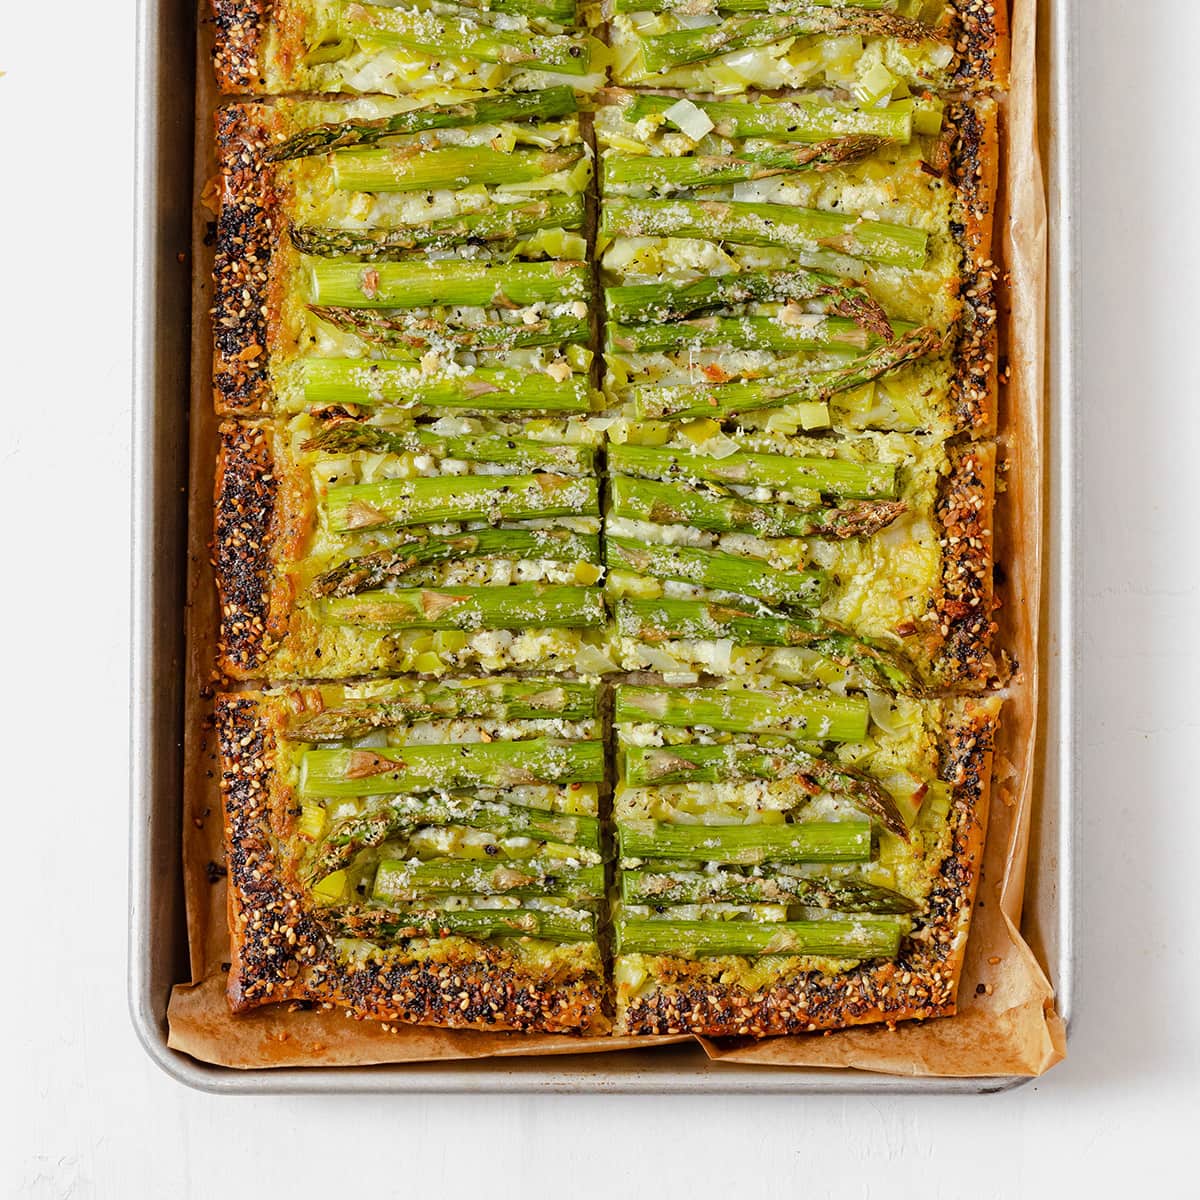 An asparagus tart on a baking sheet lined with parchment paper, cut into 8 squares.